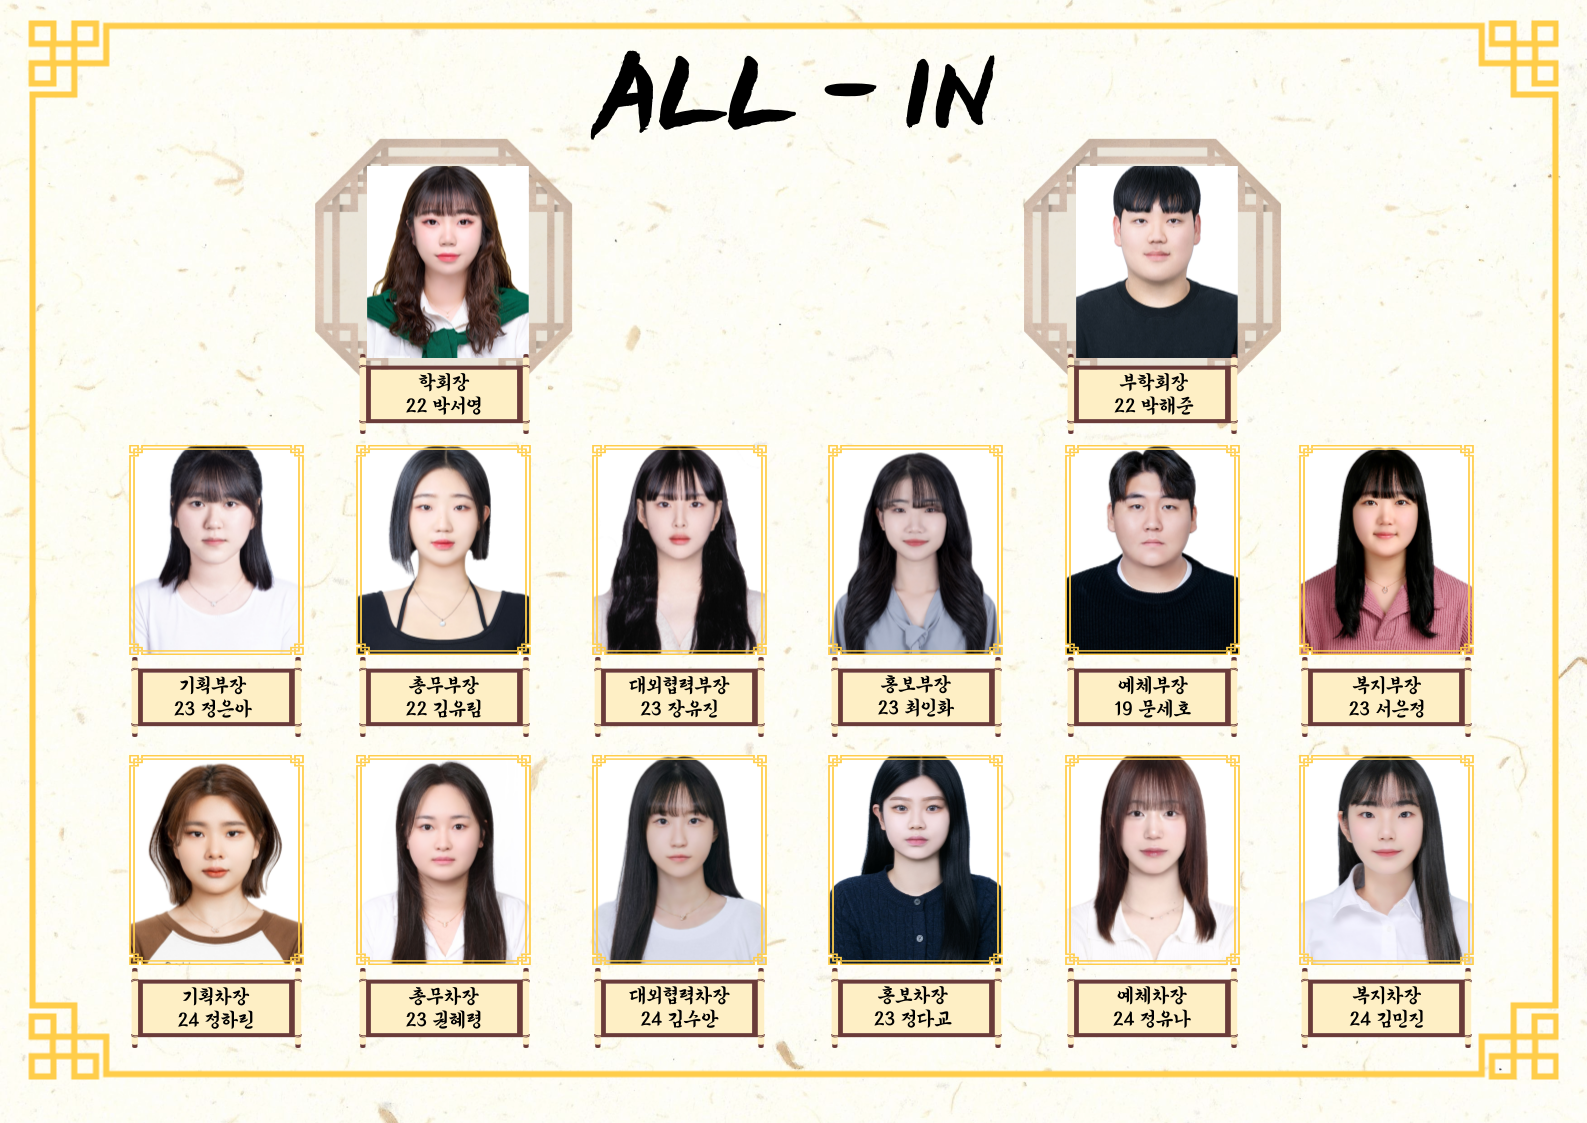 all in 조직도